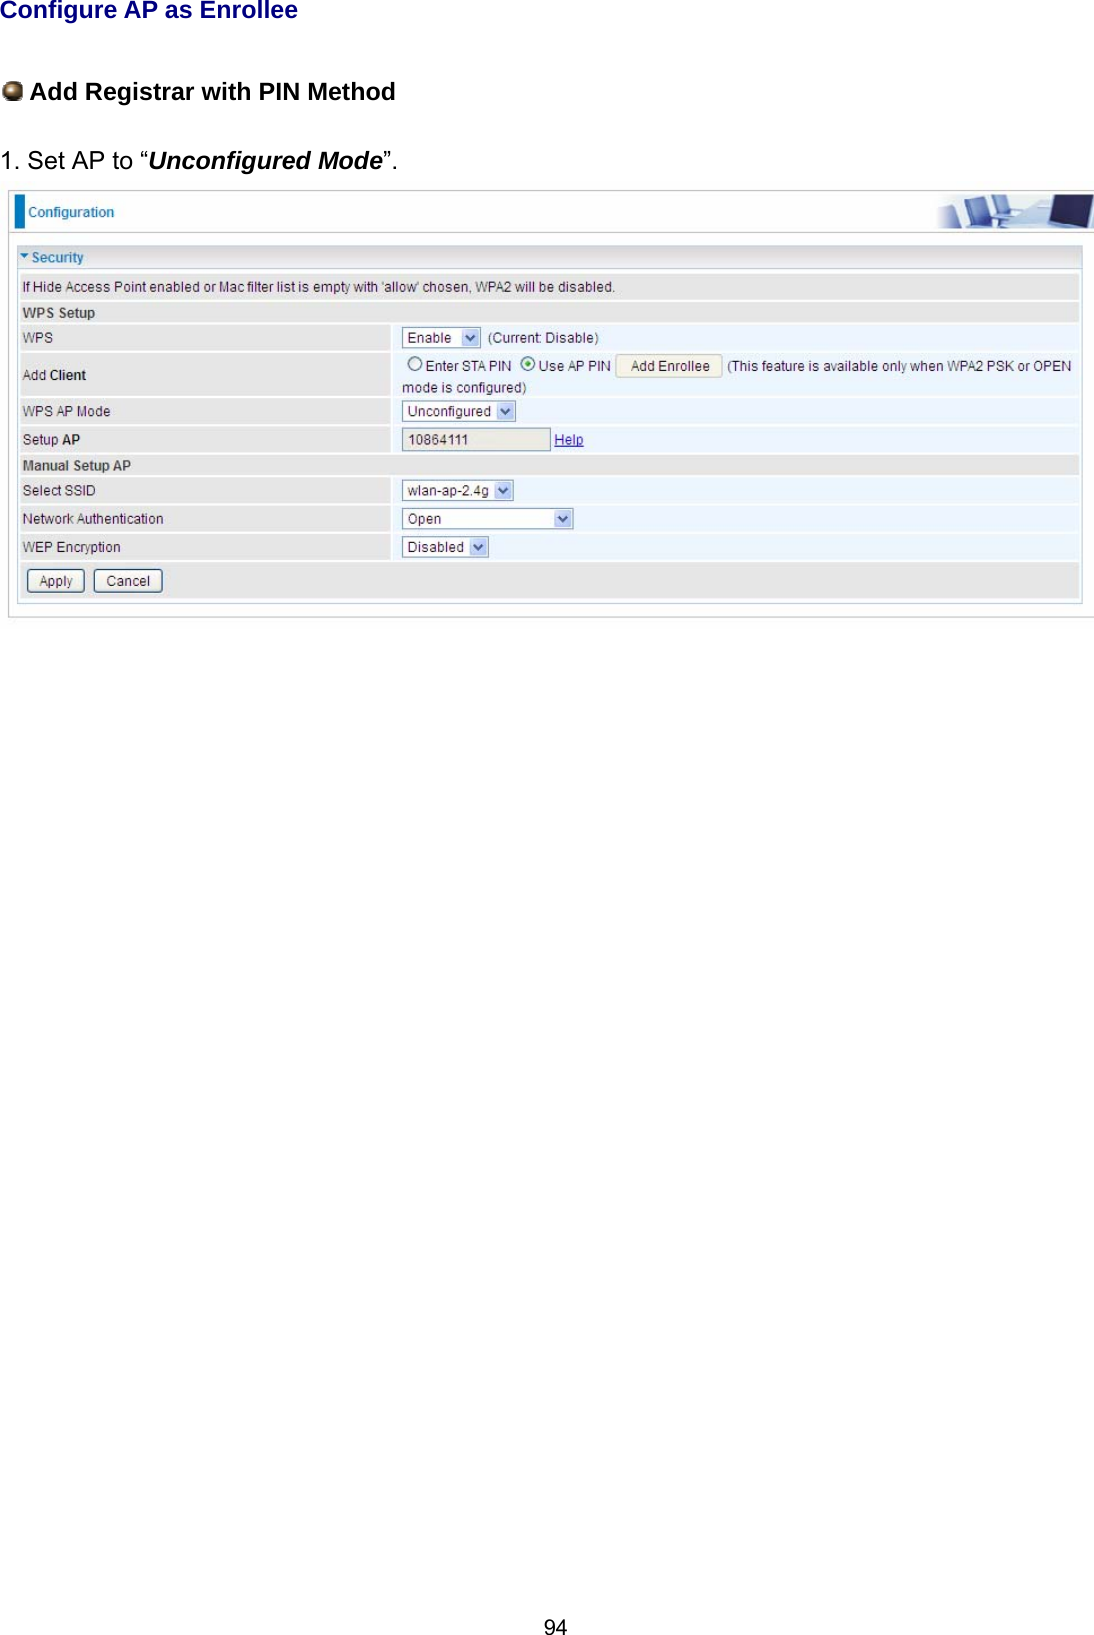  94 Configure AP as Enrollee   Add Registrar with PIN Method  1. Set AP to “Unconfigured Mode”.                                   